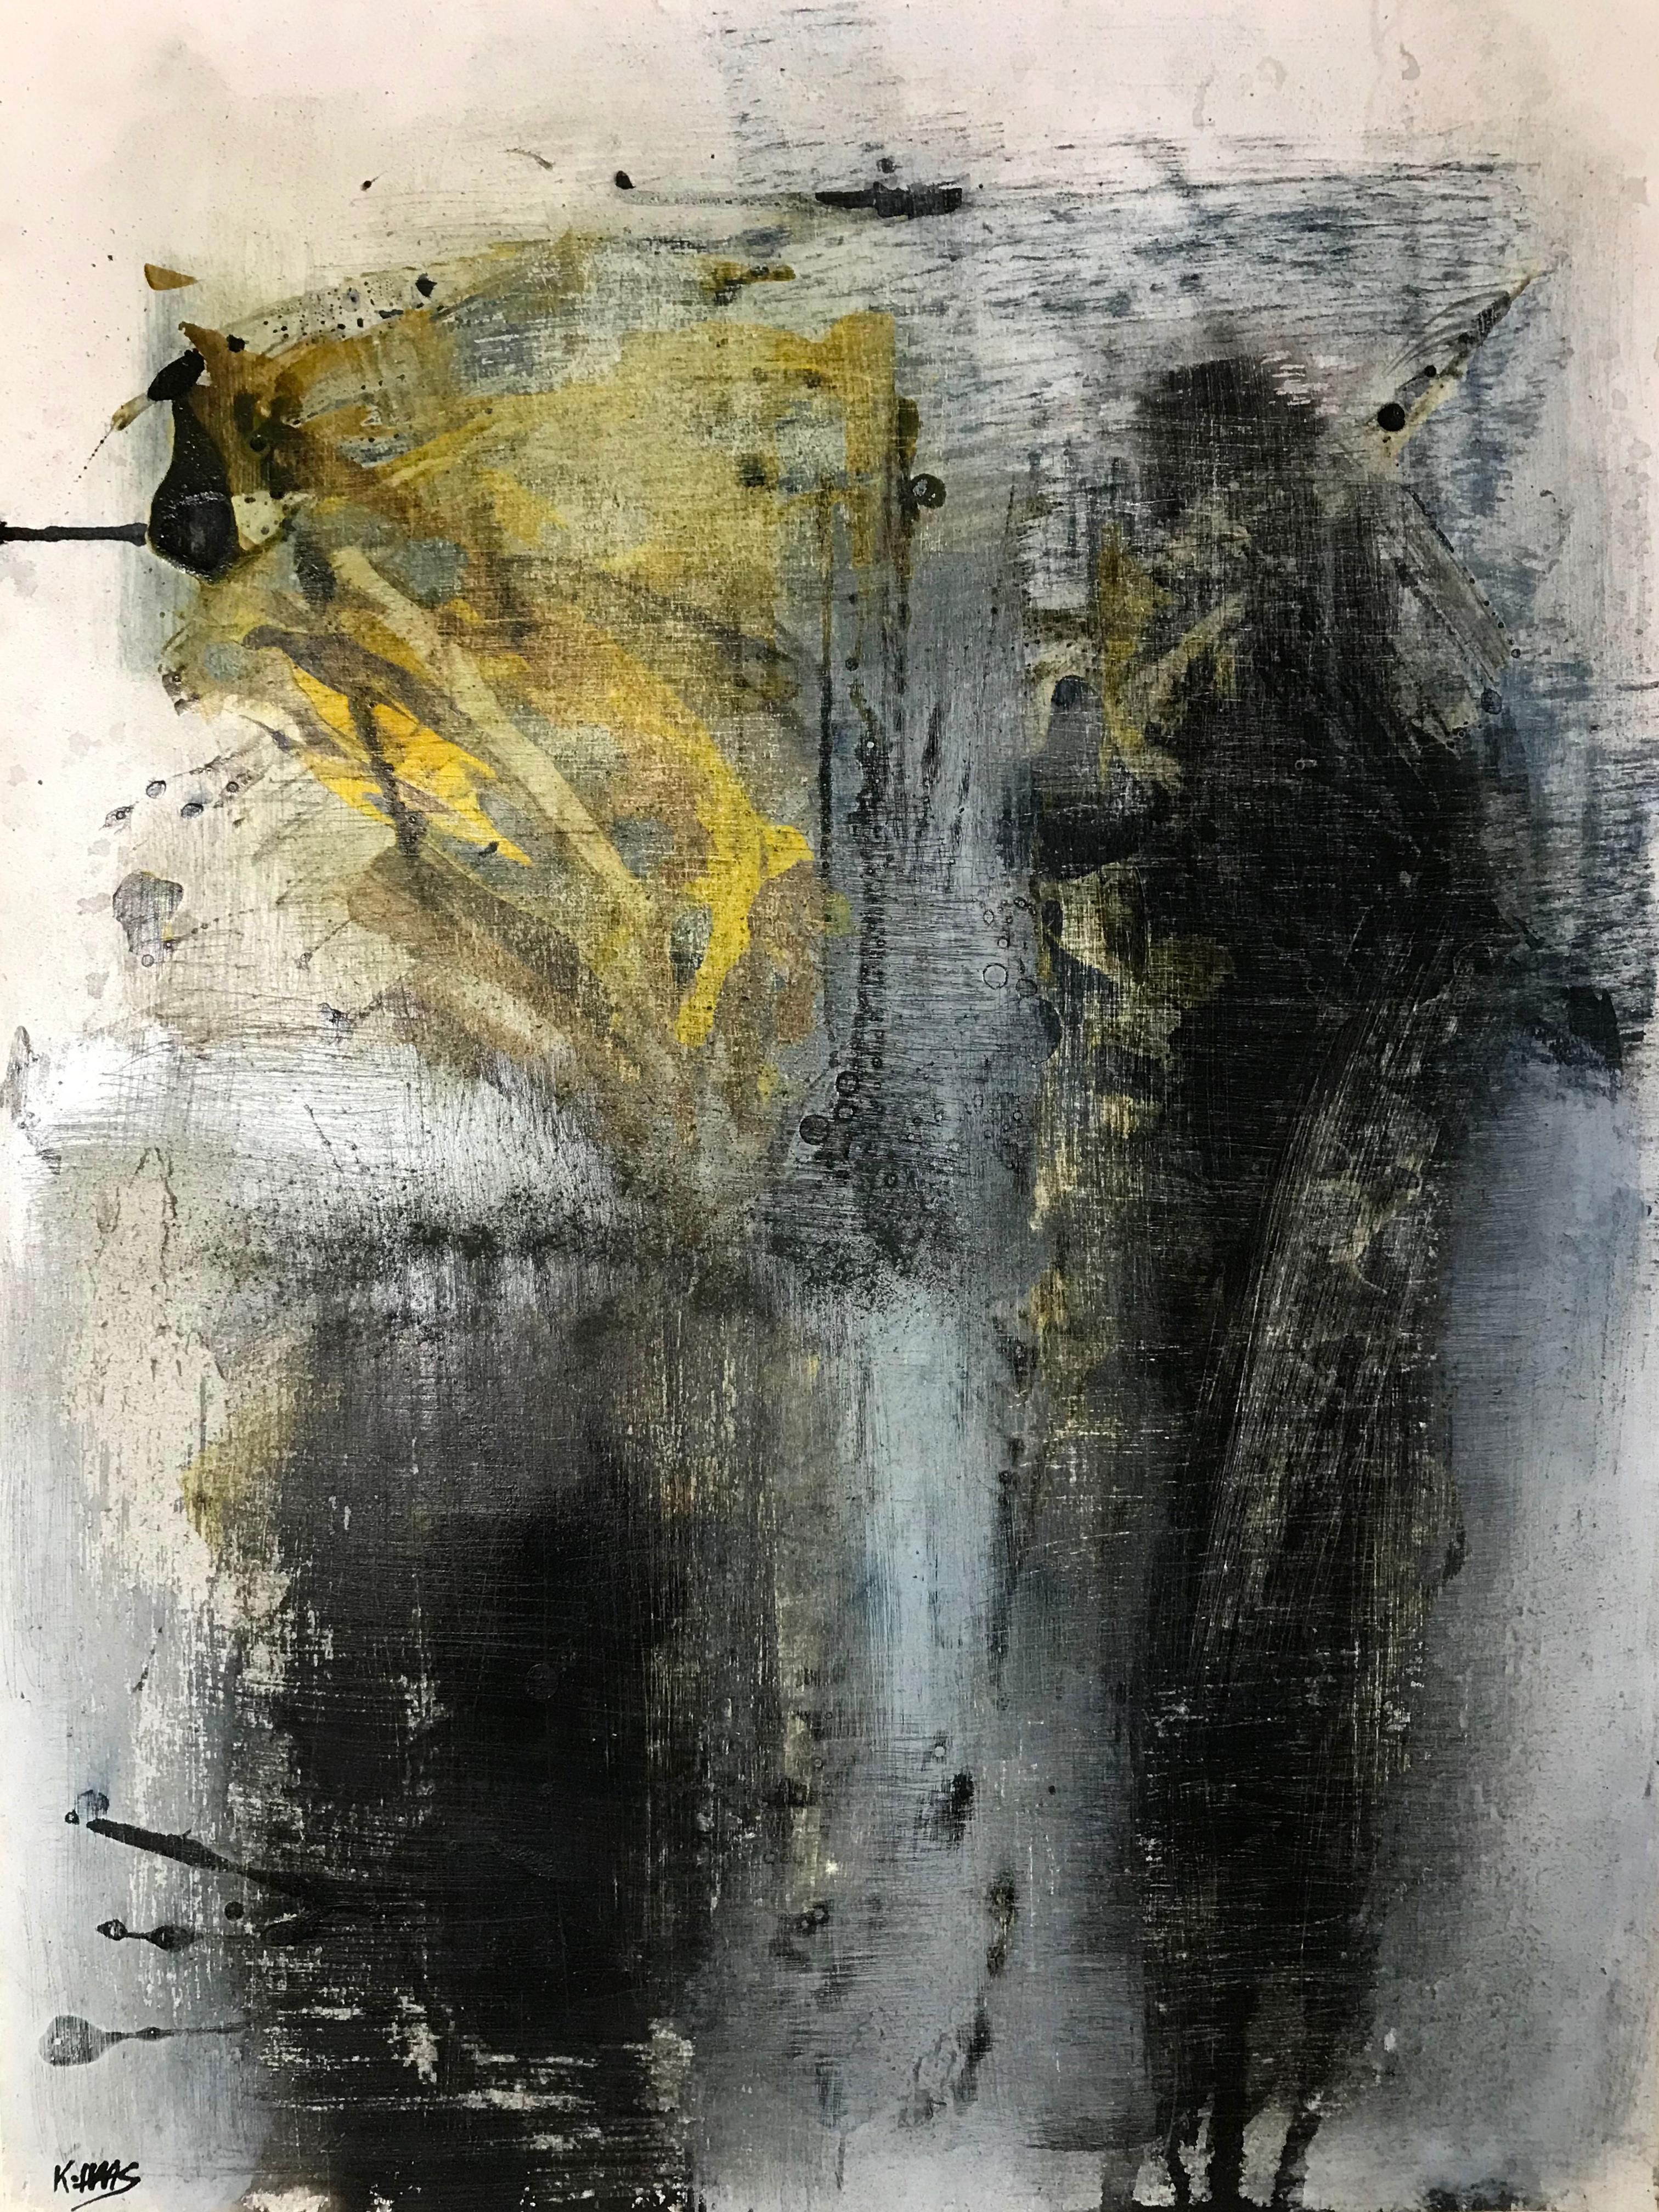 Worn & Torn #2, Abstract Painting - Mixed Media Art by Kris Haas